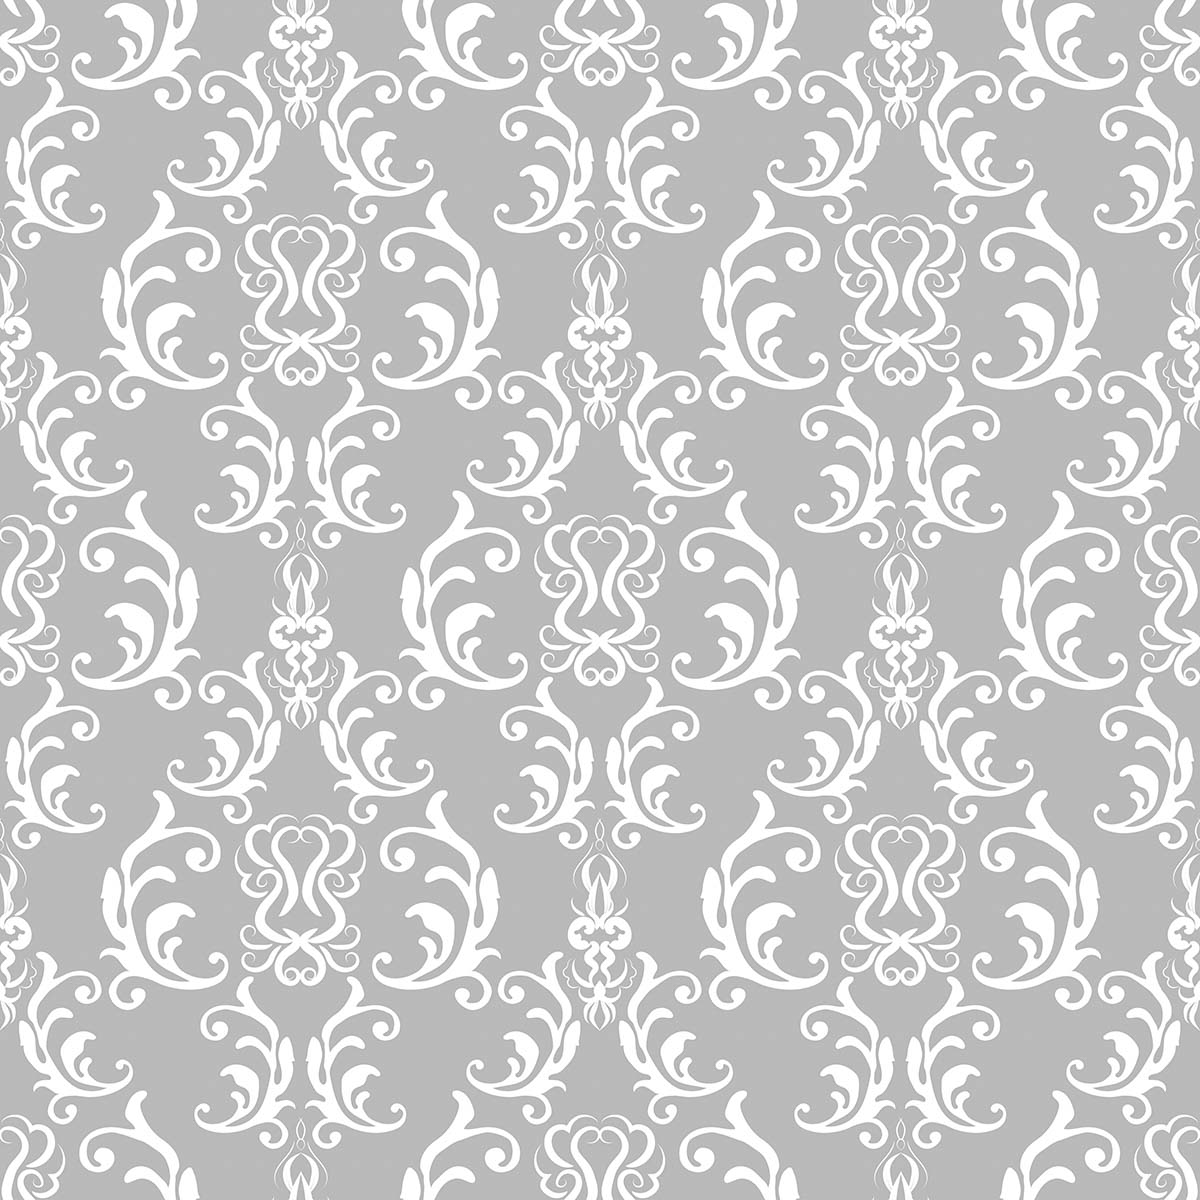 A grey and white wallpaper